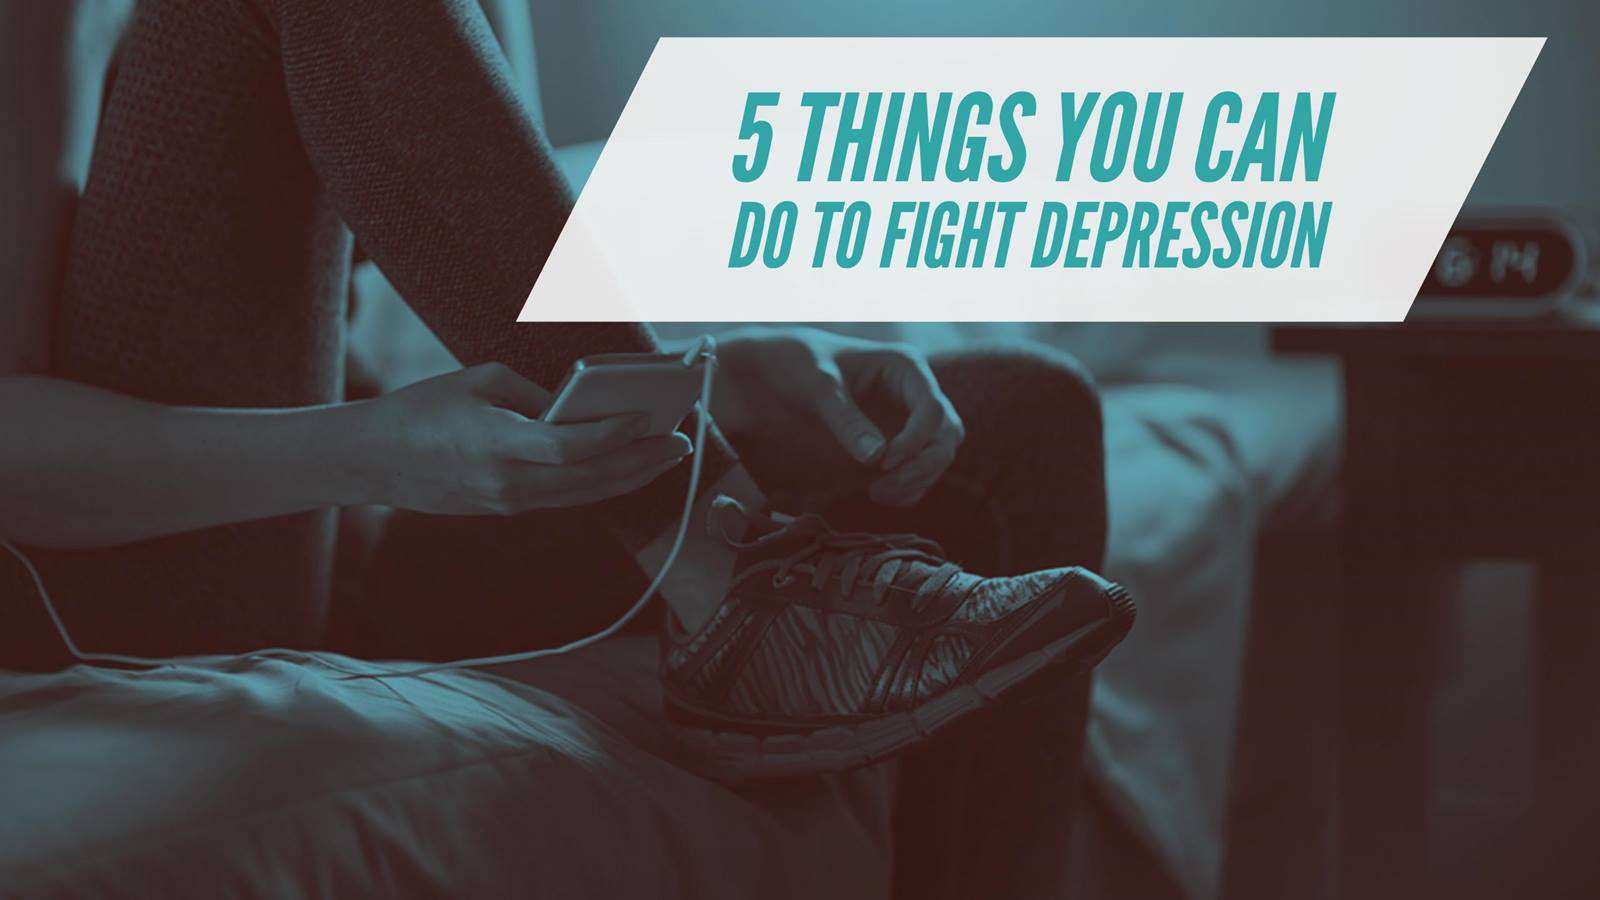 5 Proven Steps to Help Fight Depression